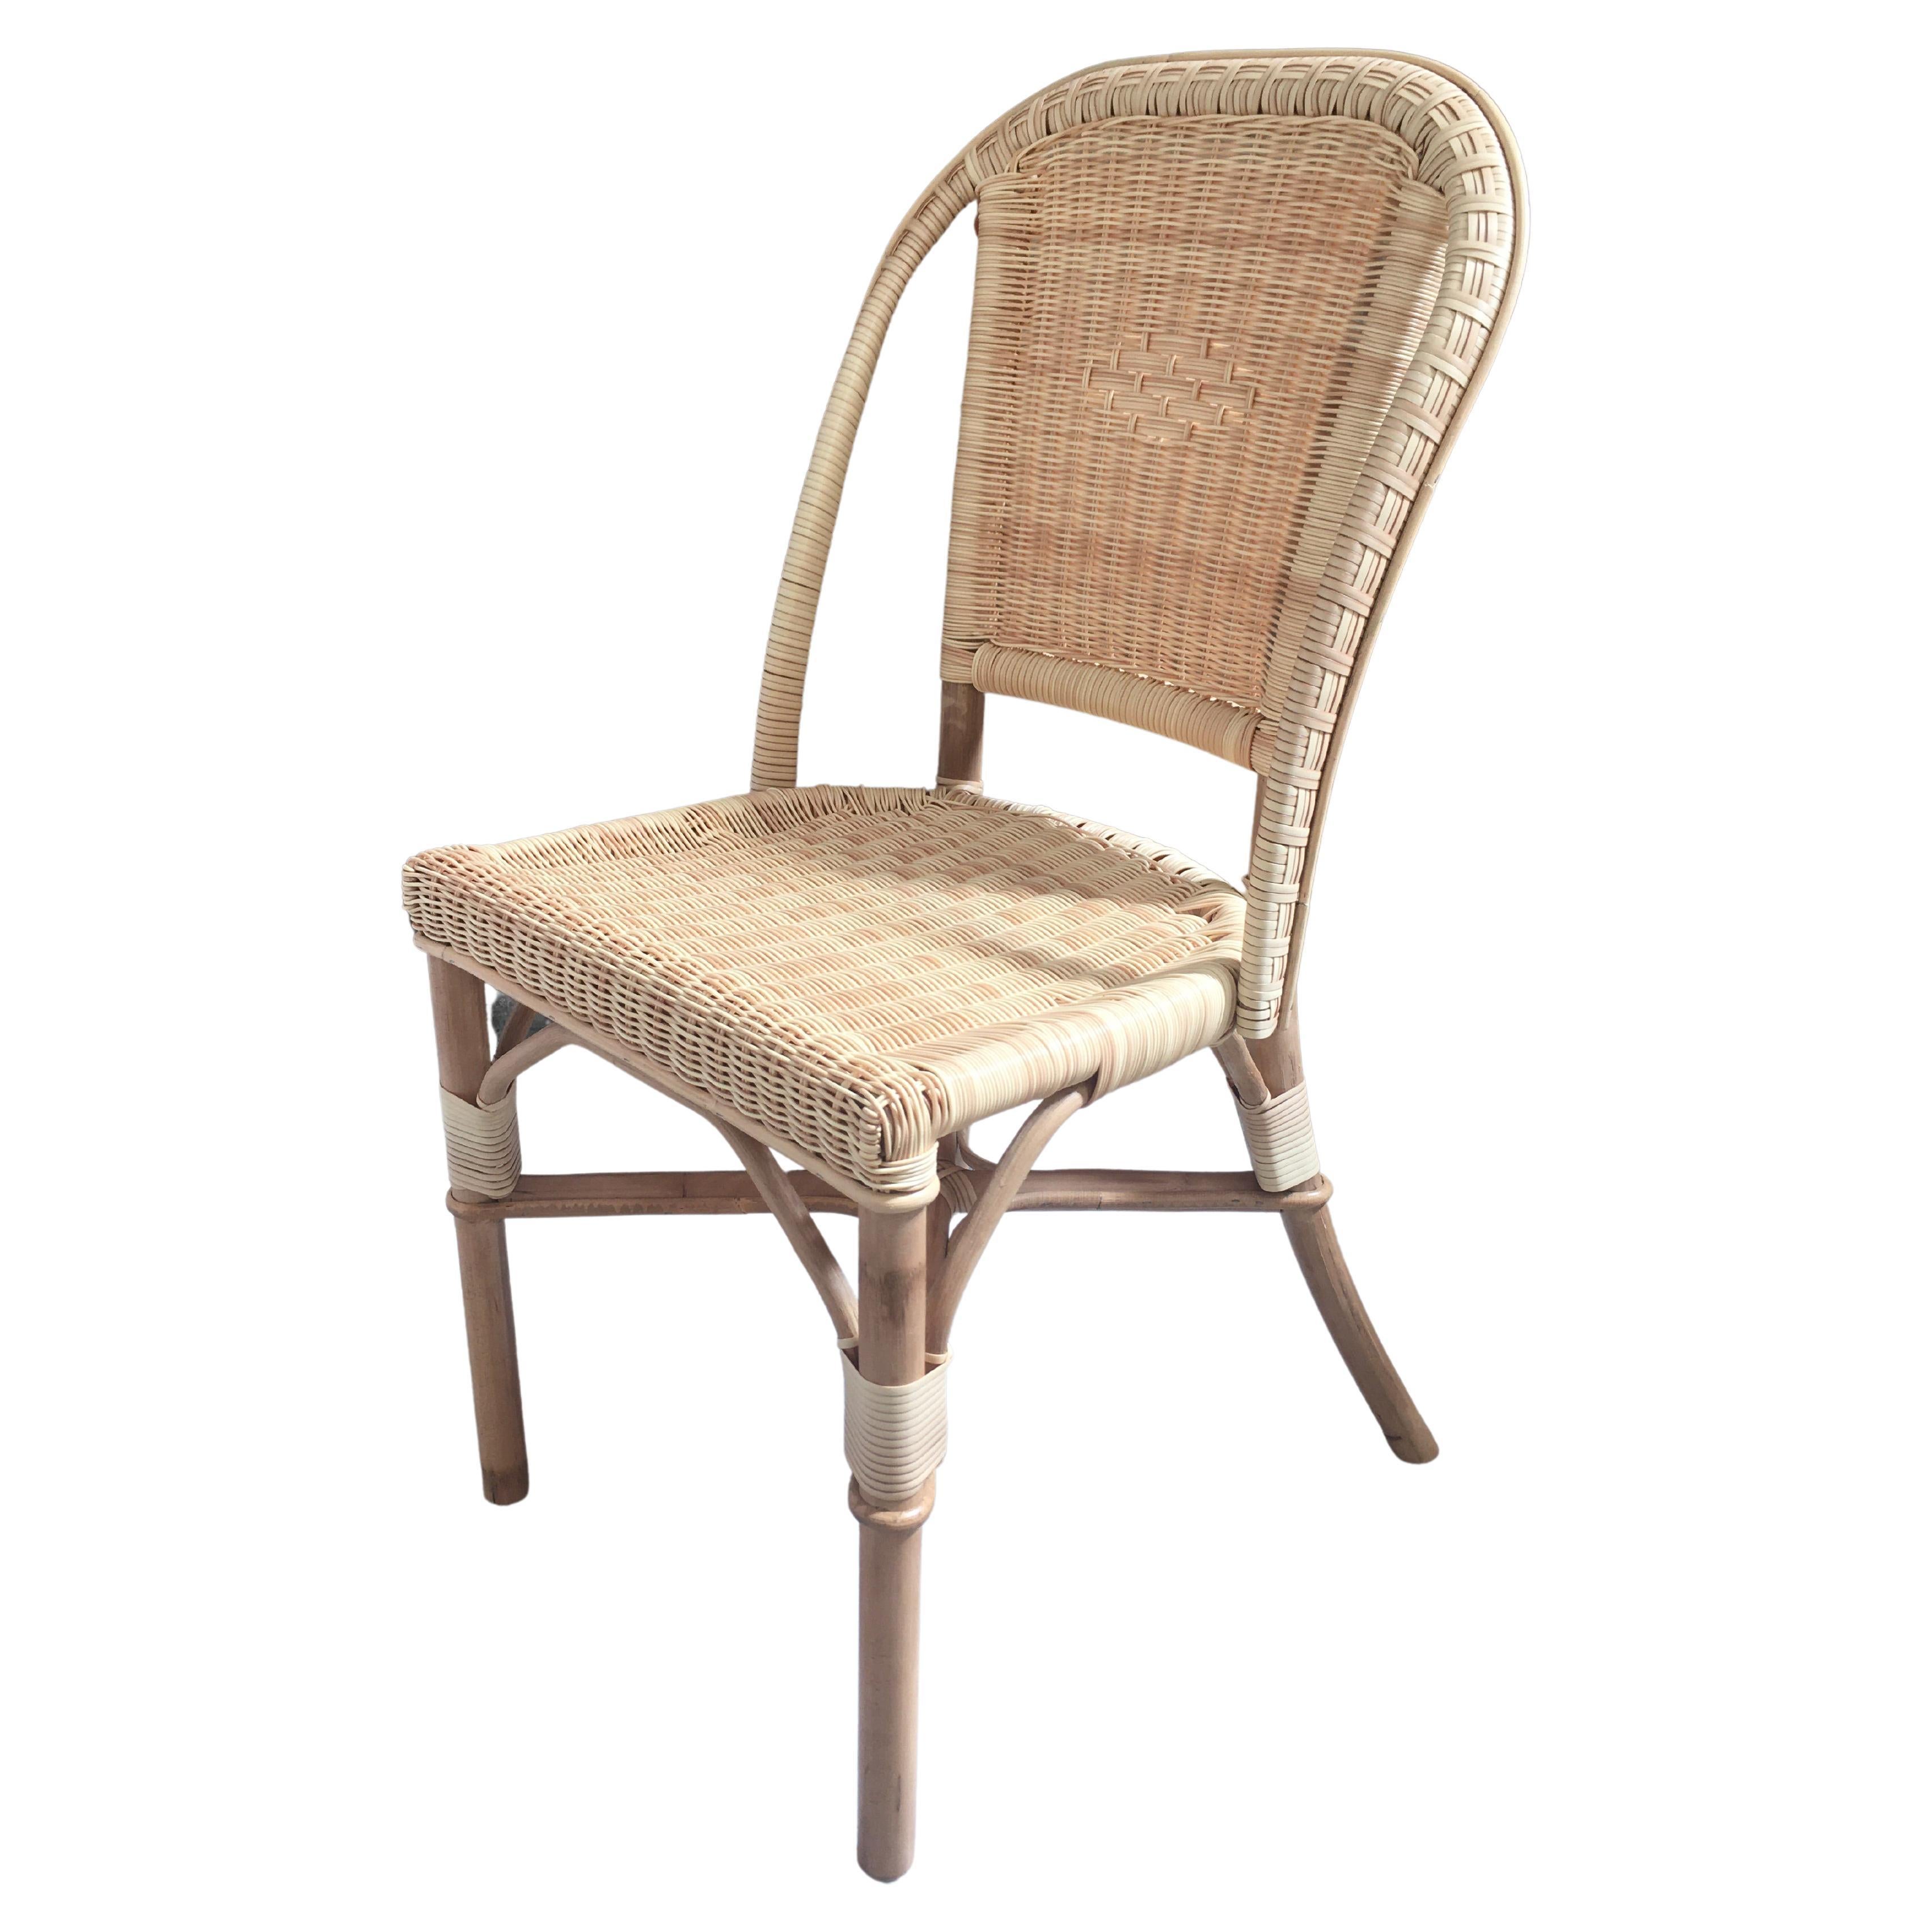 What are French bistro chairs made of?